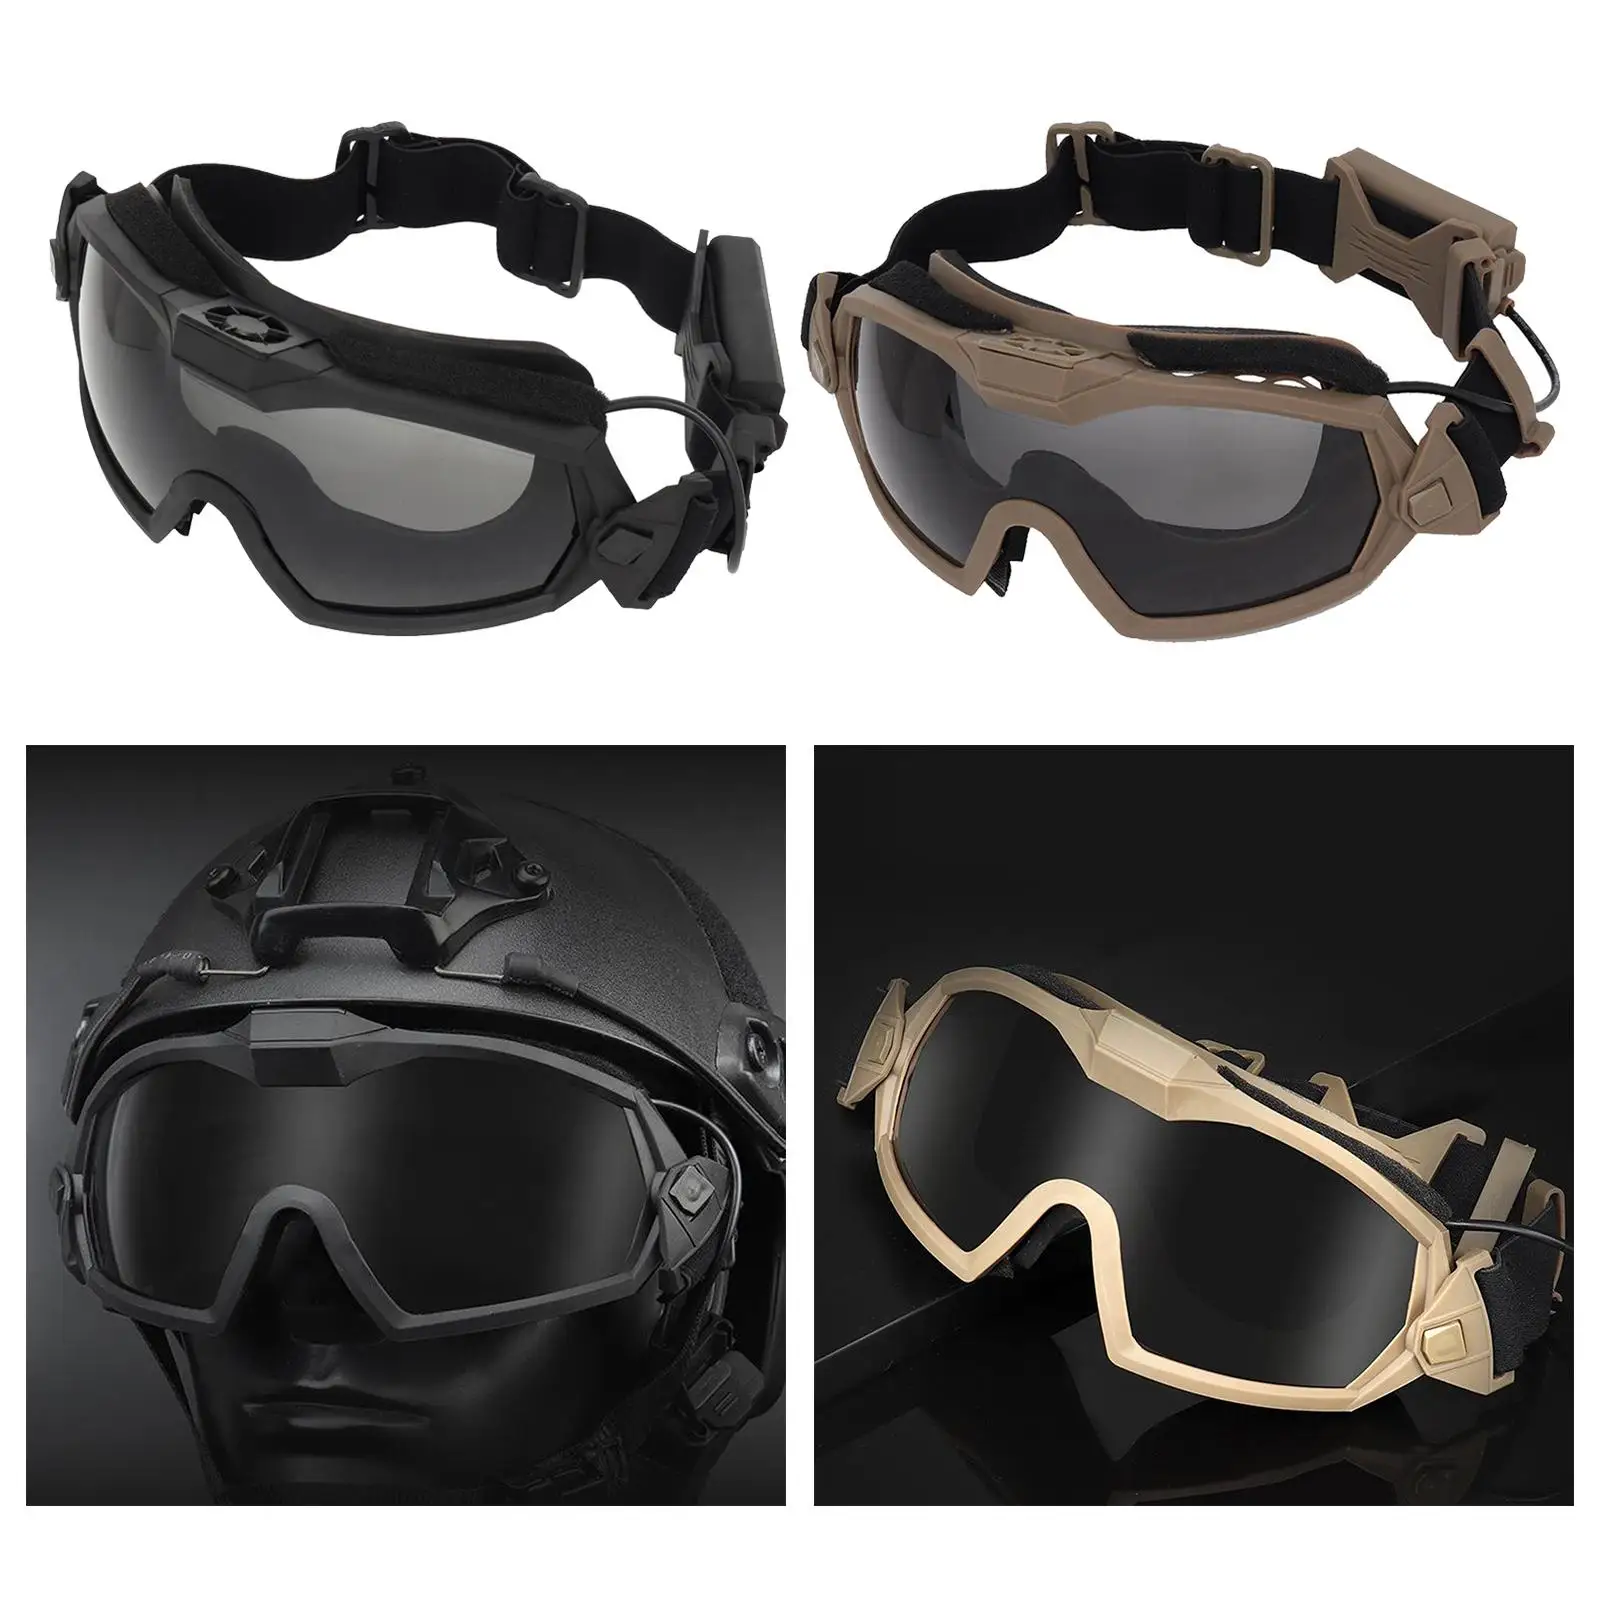 Safety Goggles Motorcycle Goggles Sunglasses with  for Shooting Hiking Skiing Riding Eye  with Cooling Fan